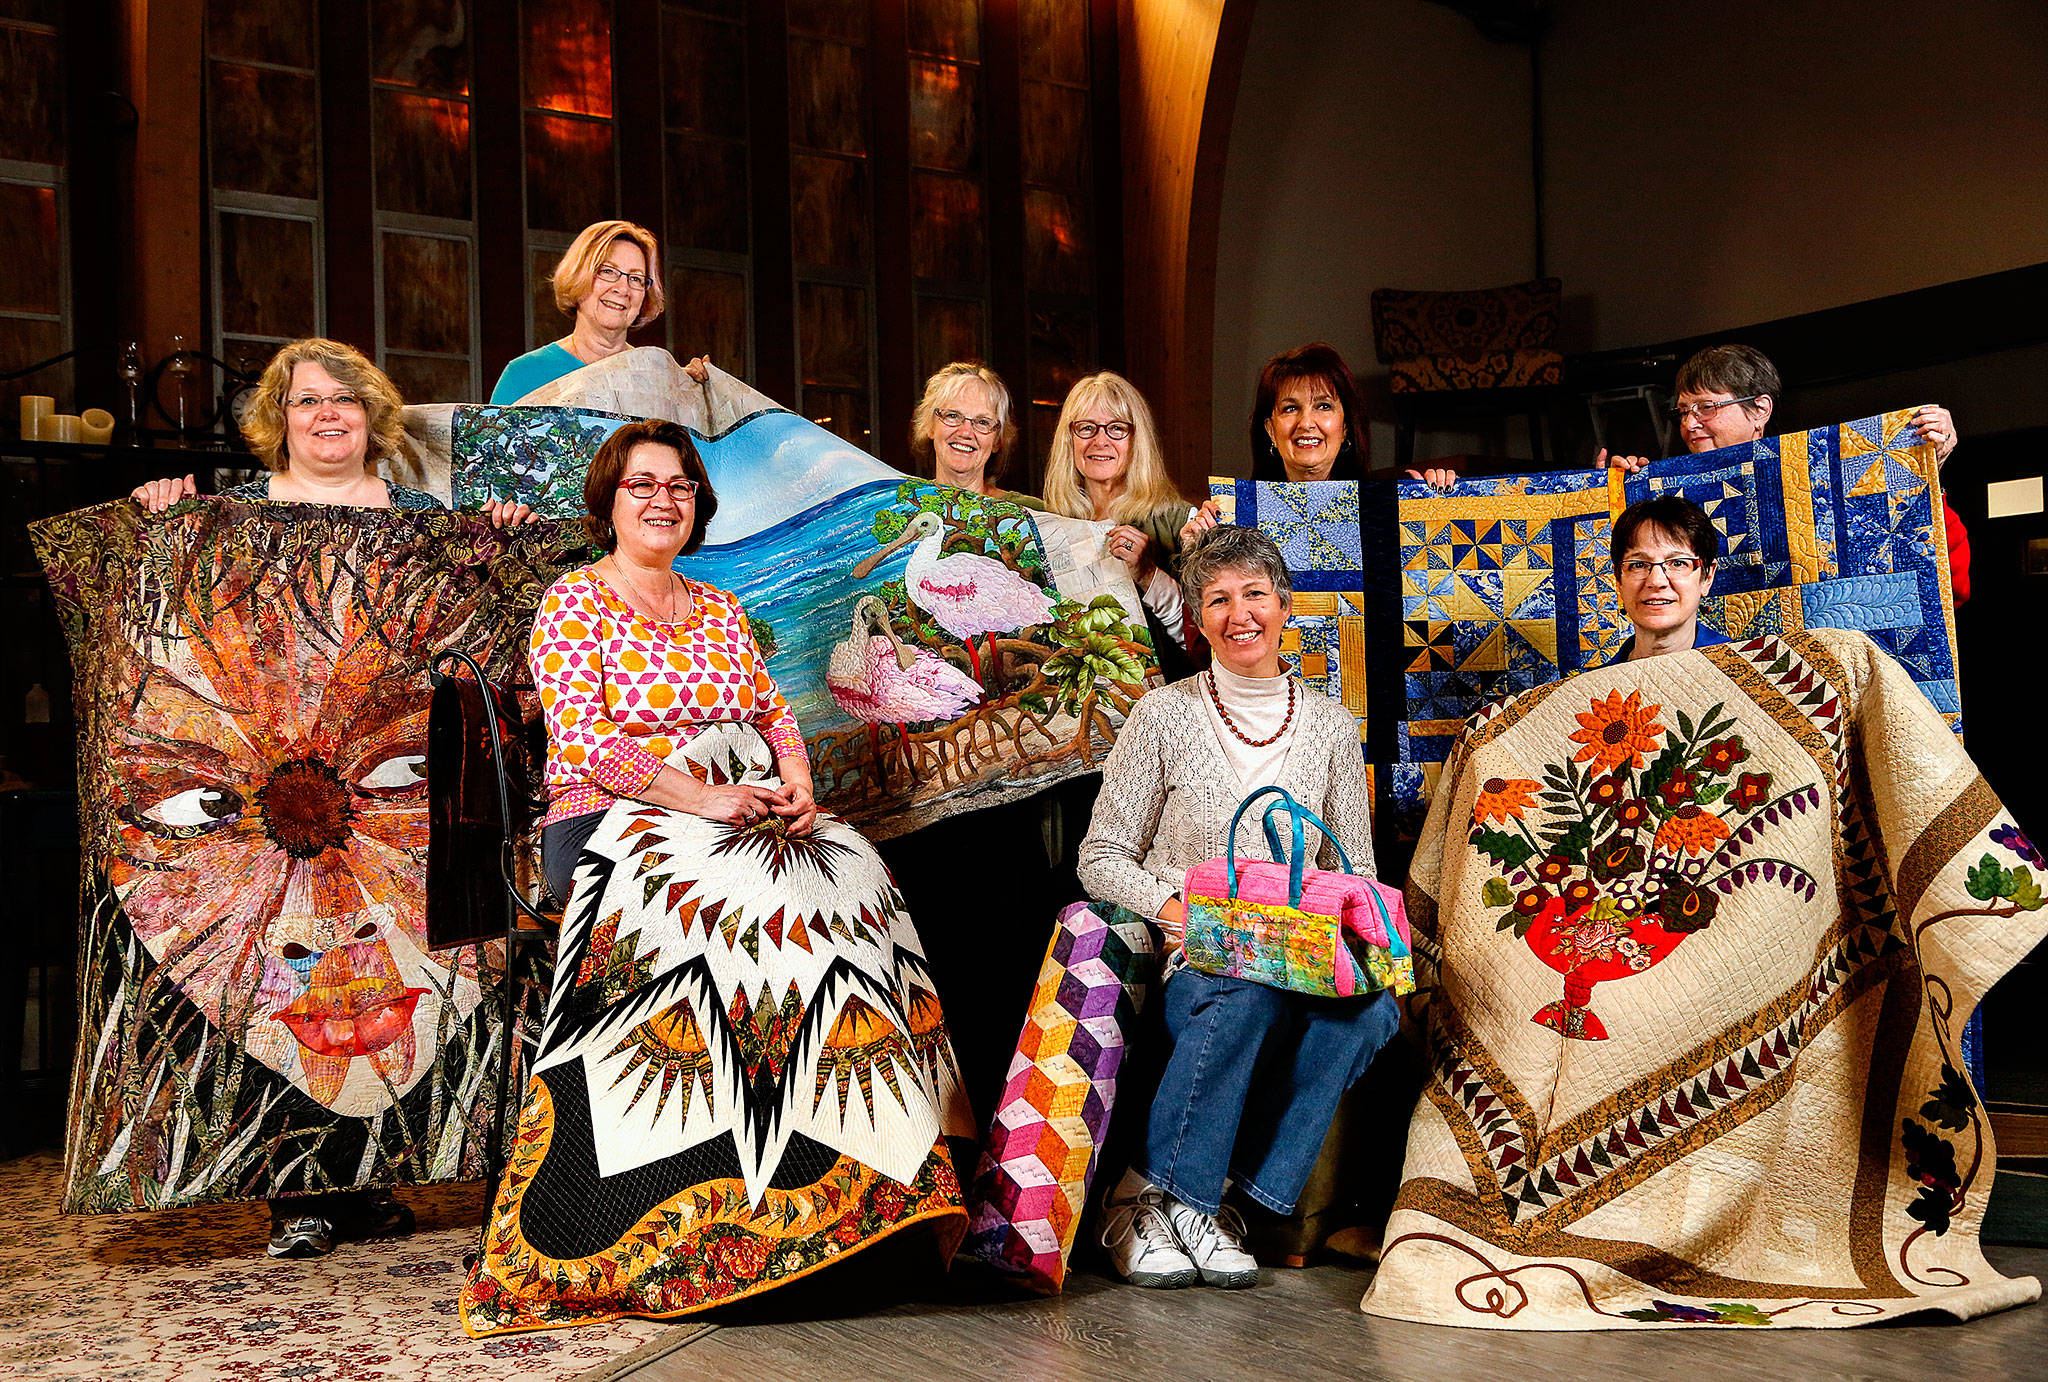 A first-ever Everett Quilt Show is scheduled for Friday and Saturday at Xfinity Arena conference center. It’s presented by some extraordinarily talented quilters in the Marysville-based All in Stitches Quilt Guild. They met Tuesday at the Living Room Coffee House, bringing with them a few masterpieces. From left are Tammy Mohiswarnath, Grace Hawley, Becky Ray, Kathy McNeil, Cathryn Scott, Shawna Gould, Darlene McCourt, Vicki Hesseltine and Shirley Rock. (Dan Bates / The Herald)